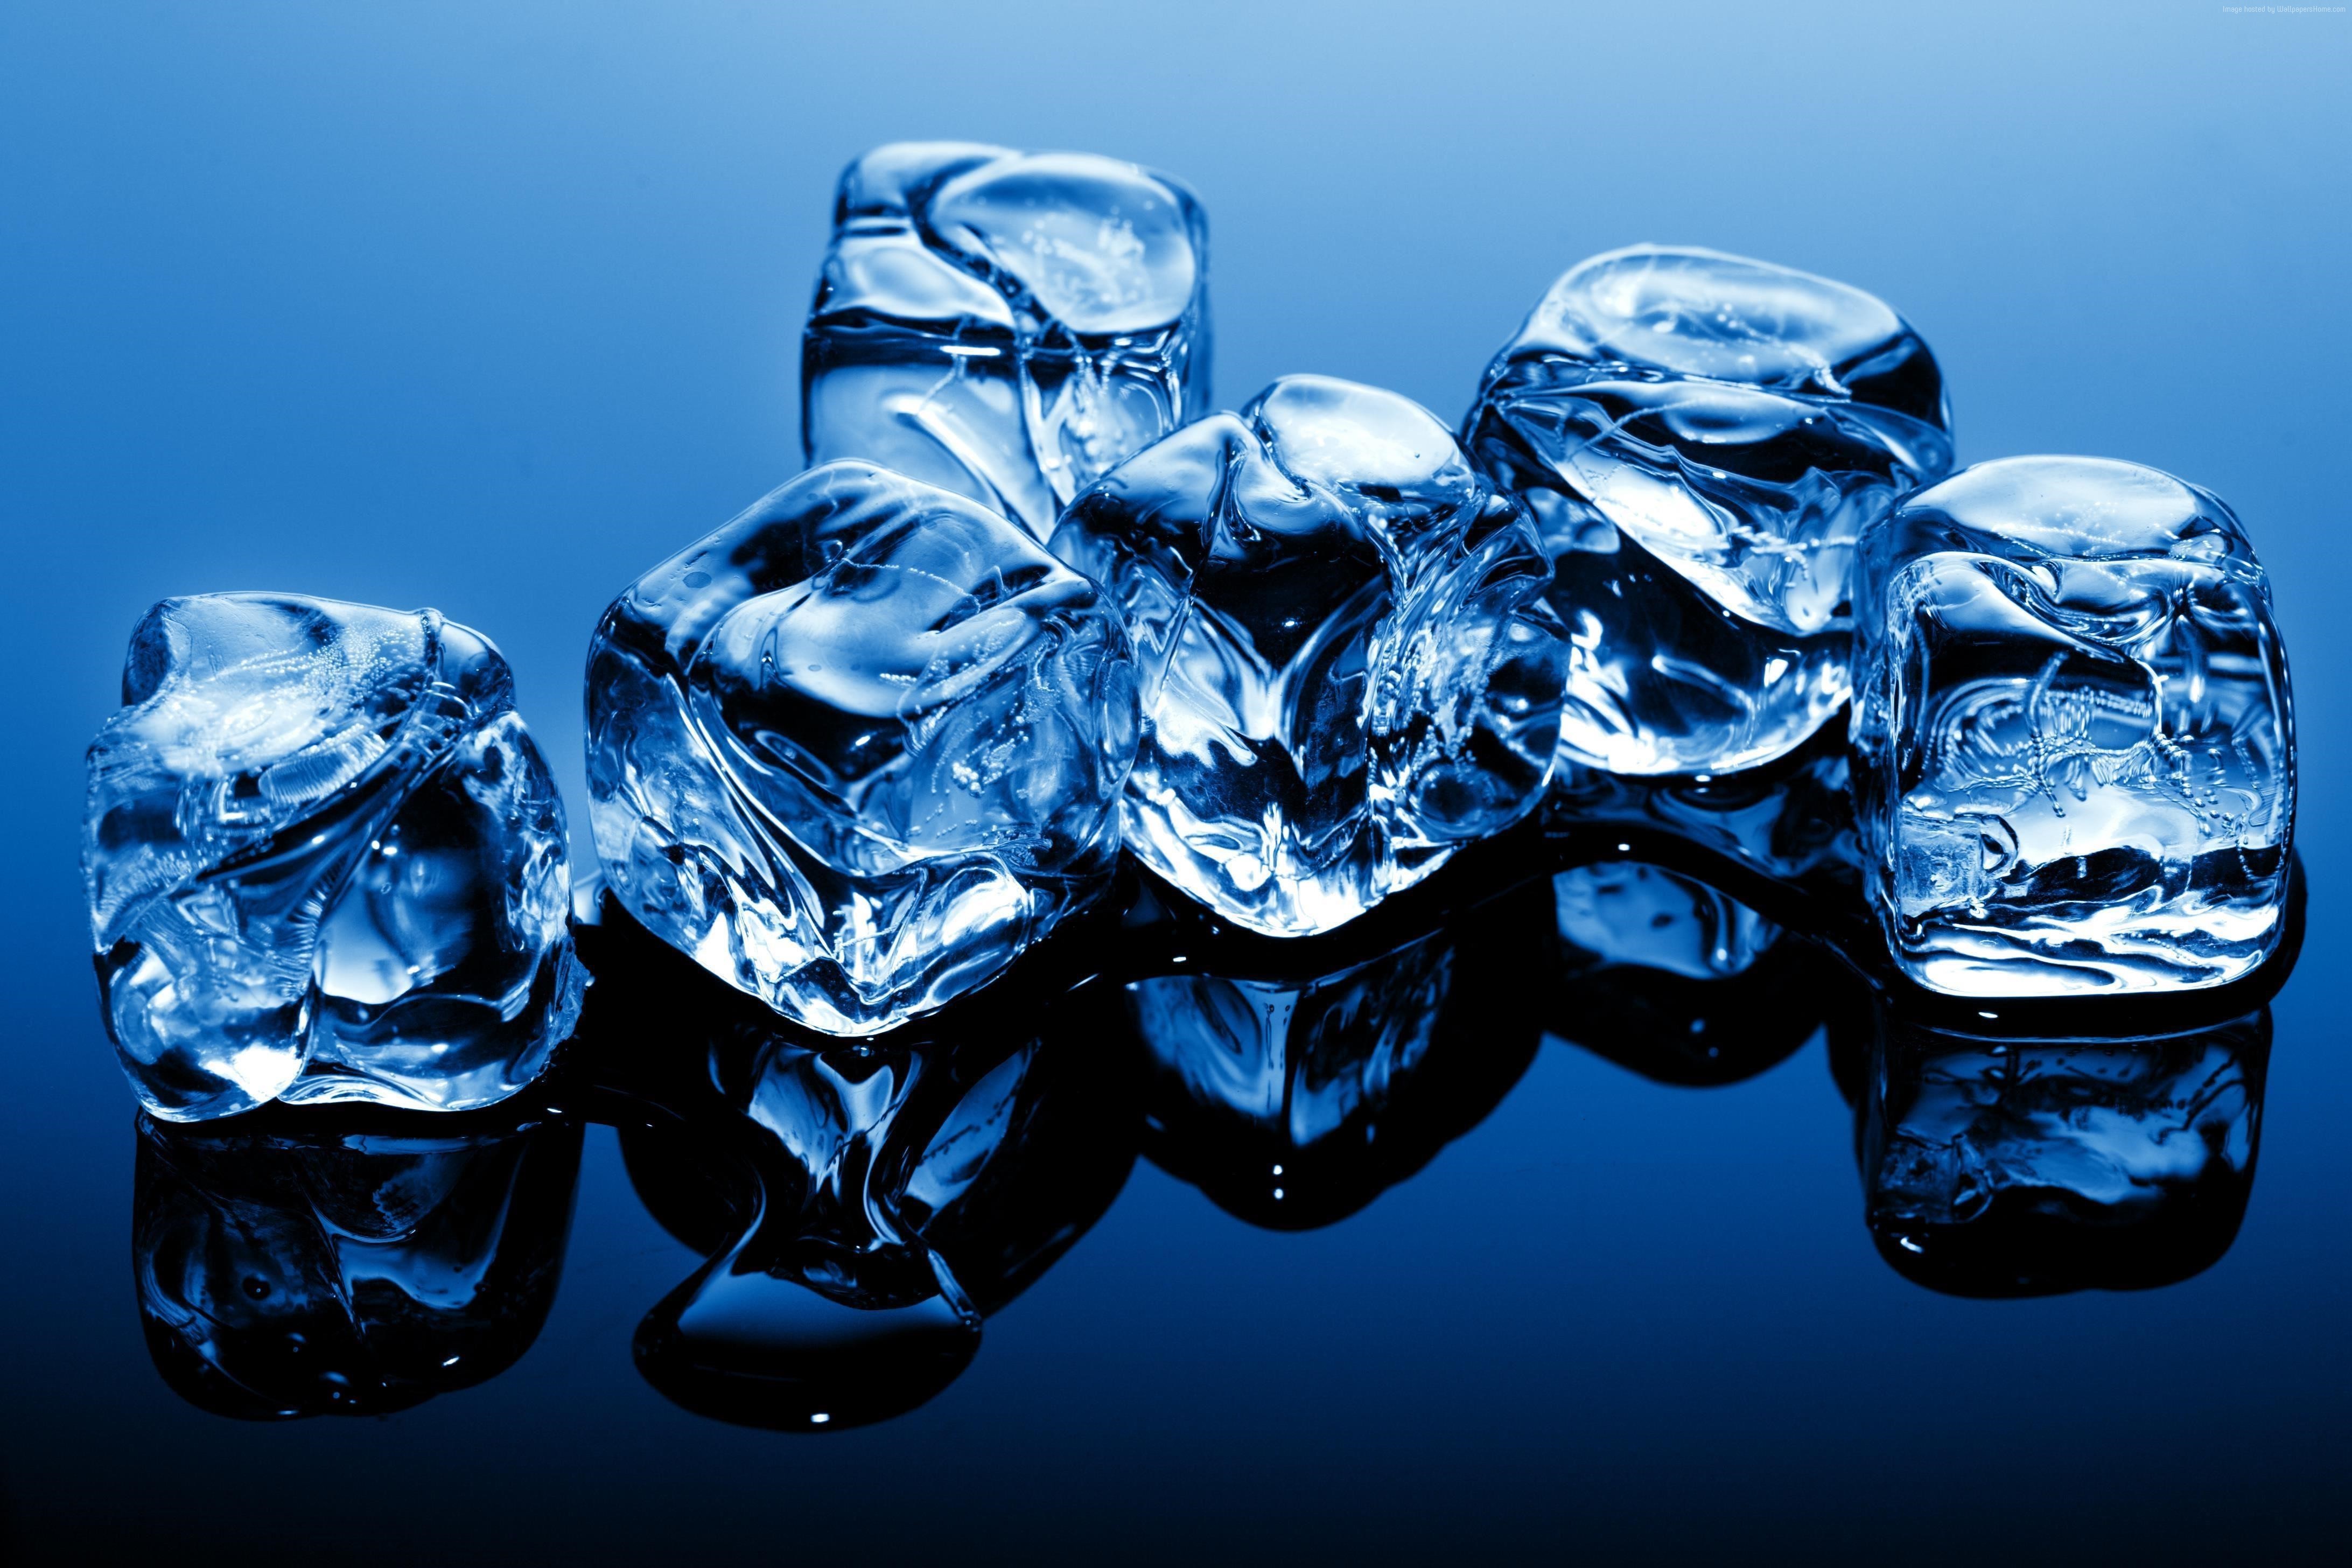 Understanding that ice cubes melt is an example of reversibility.^[[Image](https://www.flickr.com/photos/138248475@N03/23746727113) by [John Voo](https://www.flickr.com/photos/138248475@N03/) is licensed under [CC BY 2.0](https://creativecommons.org/licenses/by/2.0/)]